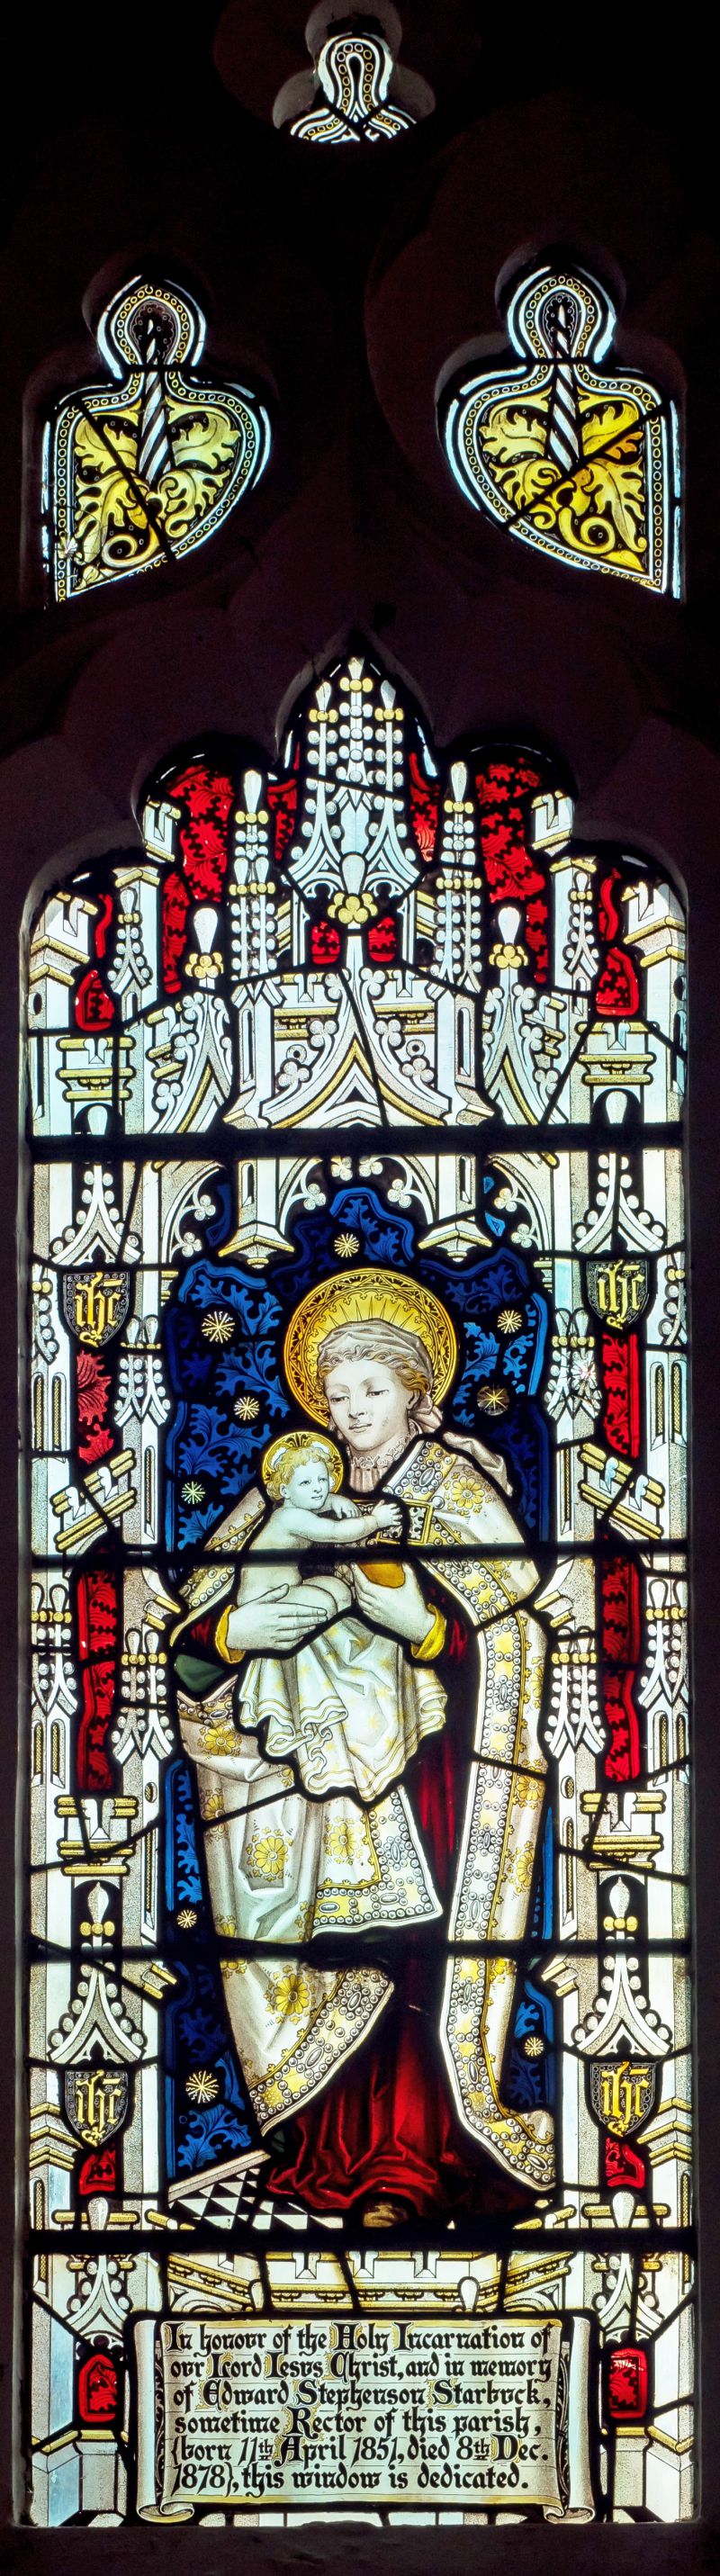  St Mary the Virgin, Salcott cum Virley.

South side of chancel, and now the earliest glass in the church. It is by Kempe in 1897 and depicts the Virgin and child.



The inscription reads

In honour of the Holy Incarnation of our Lord Jesus Christ and in memory of Edward Stephenson Starbuck, sometime Rector of this parish, (born 11th April 1851, died 8th Dec. 1878), this window is ...
Cat1 Places-->Salcott & Virley